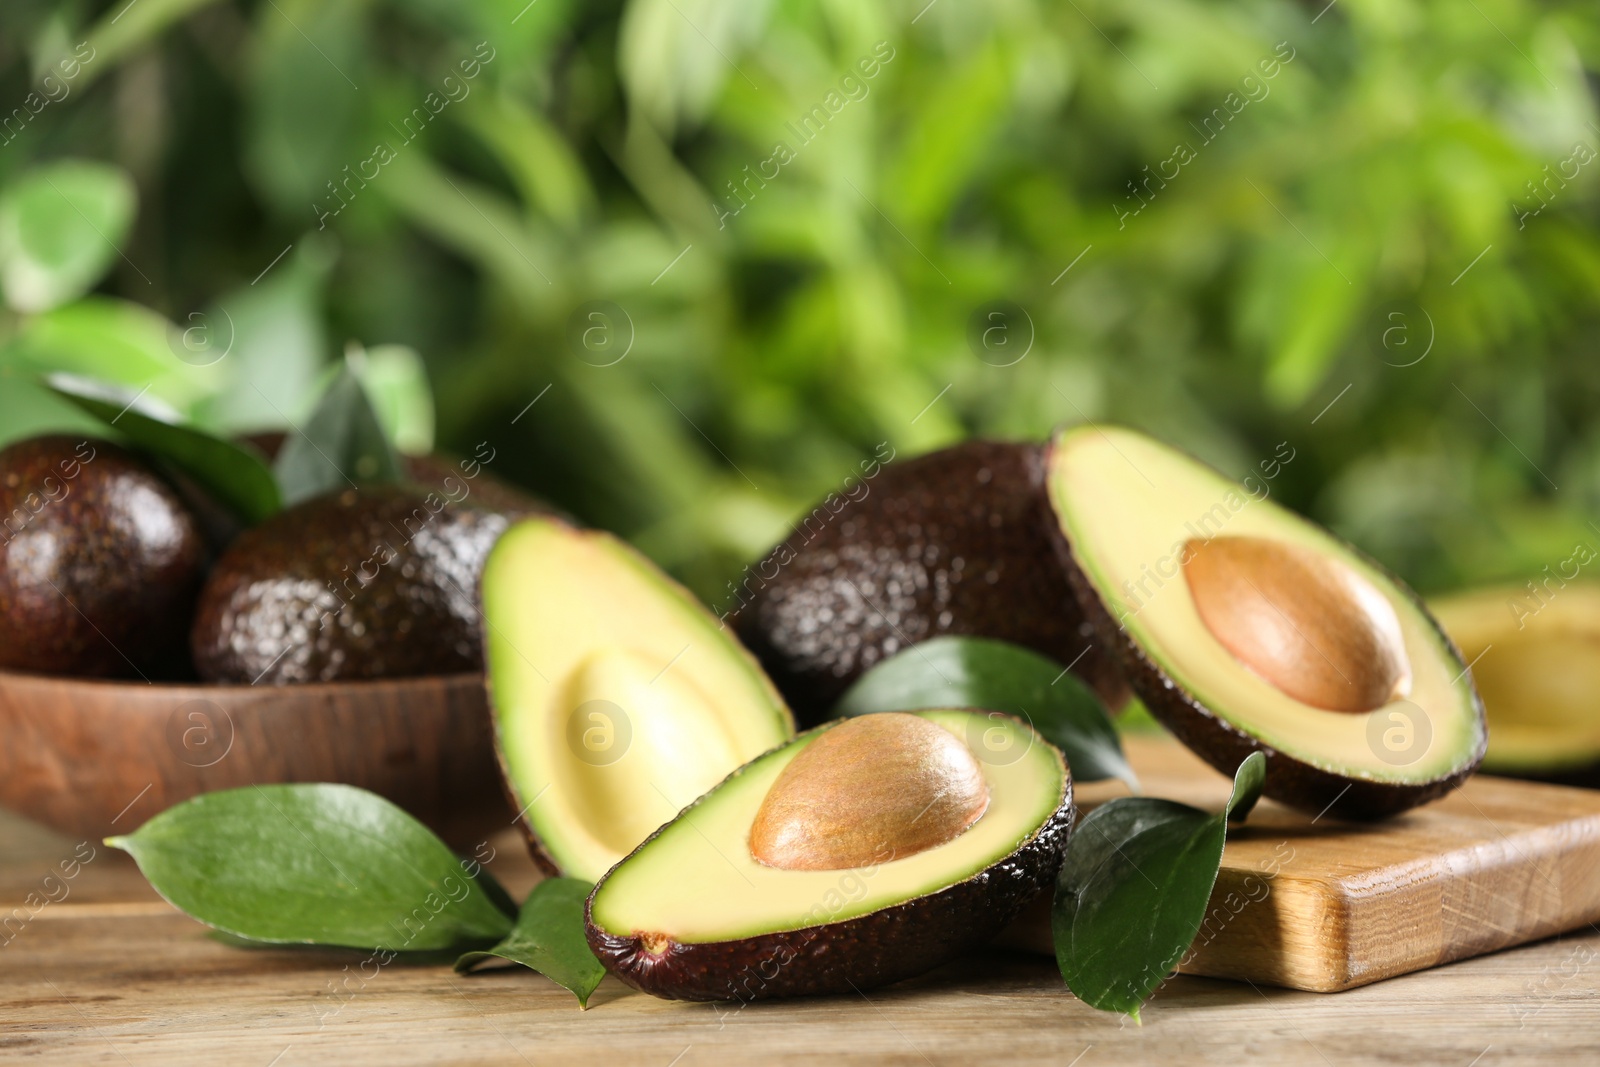 Photo of Whole and cut avocados with green leaves on wooden table